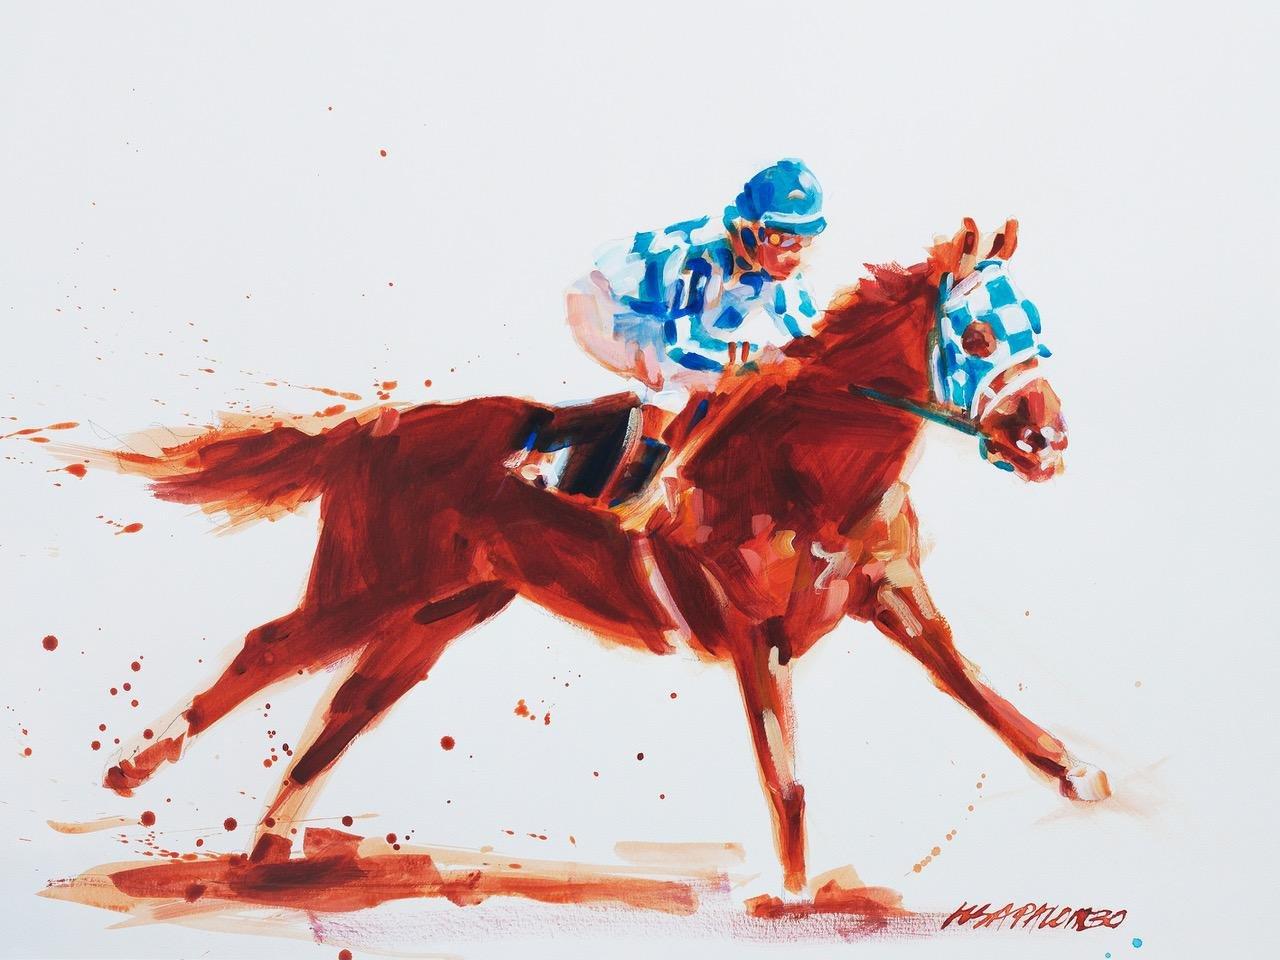 Lisa Palombo, "More Than Just a Horse" Secretariat Equine Acrylic Painting 